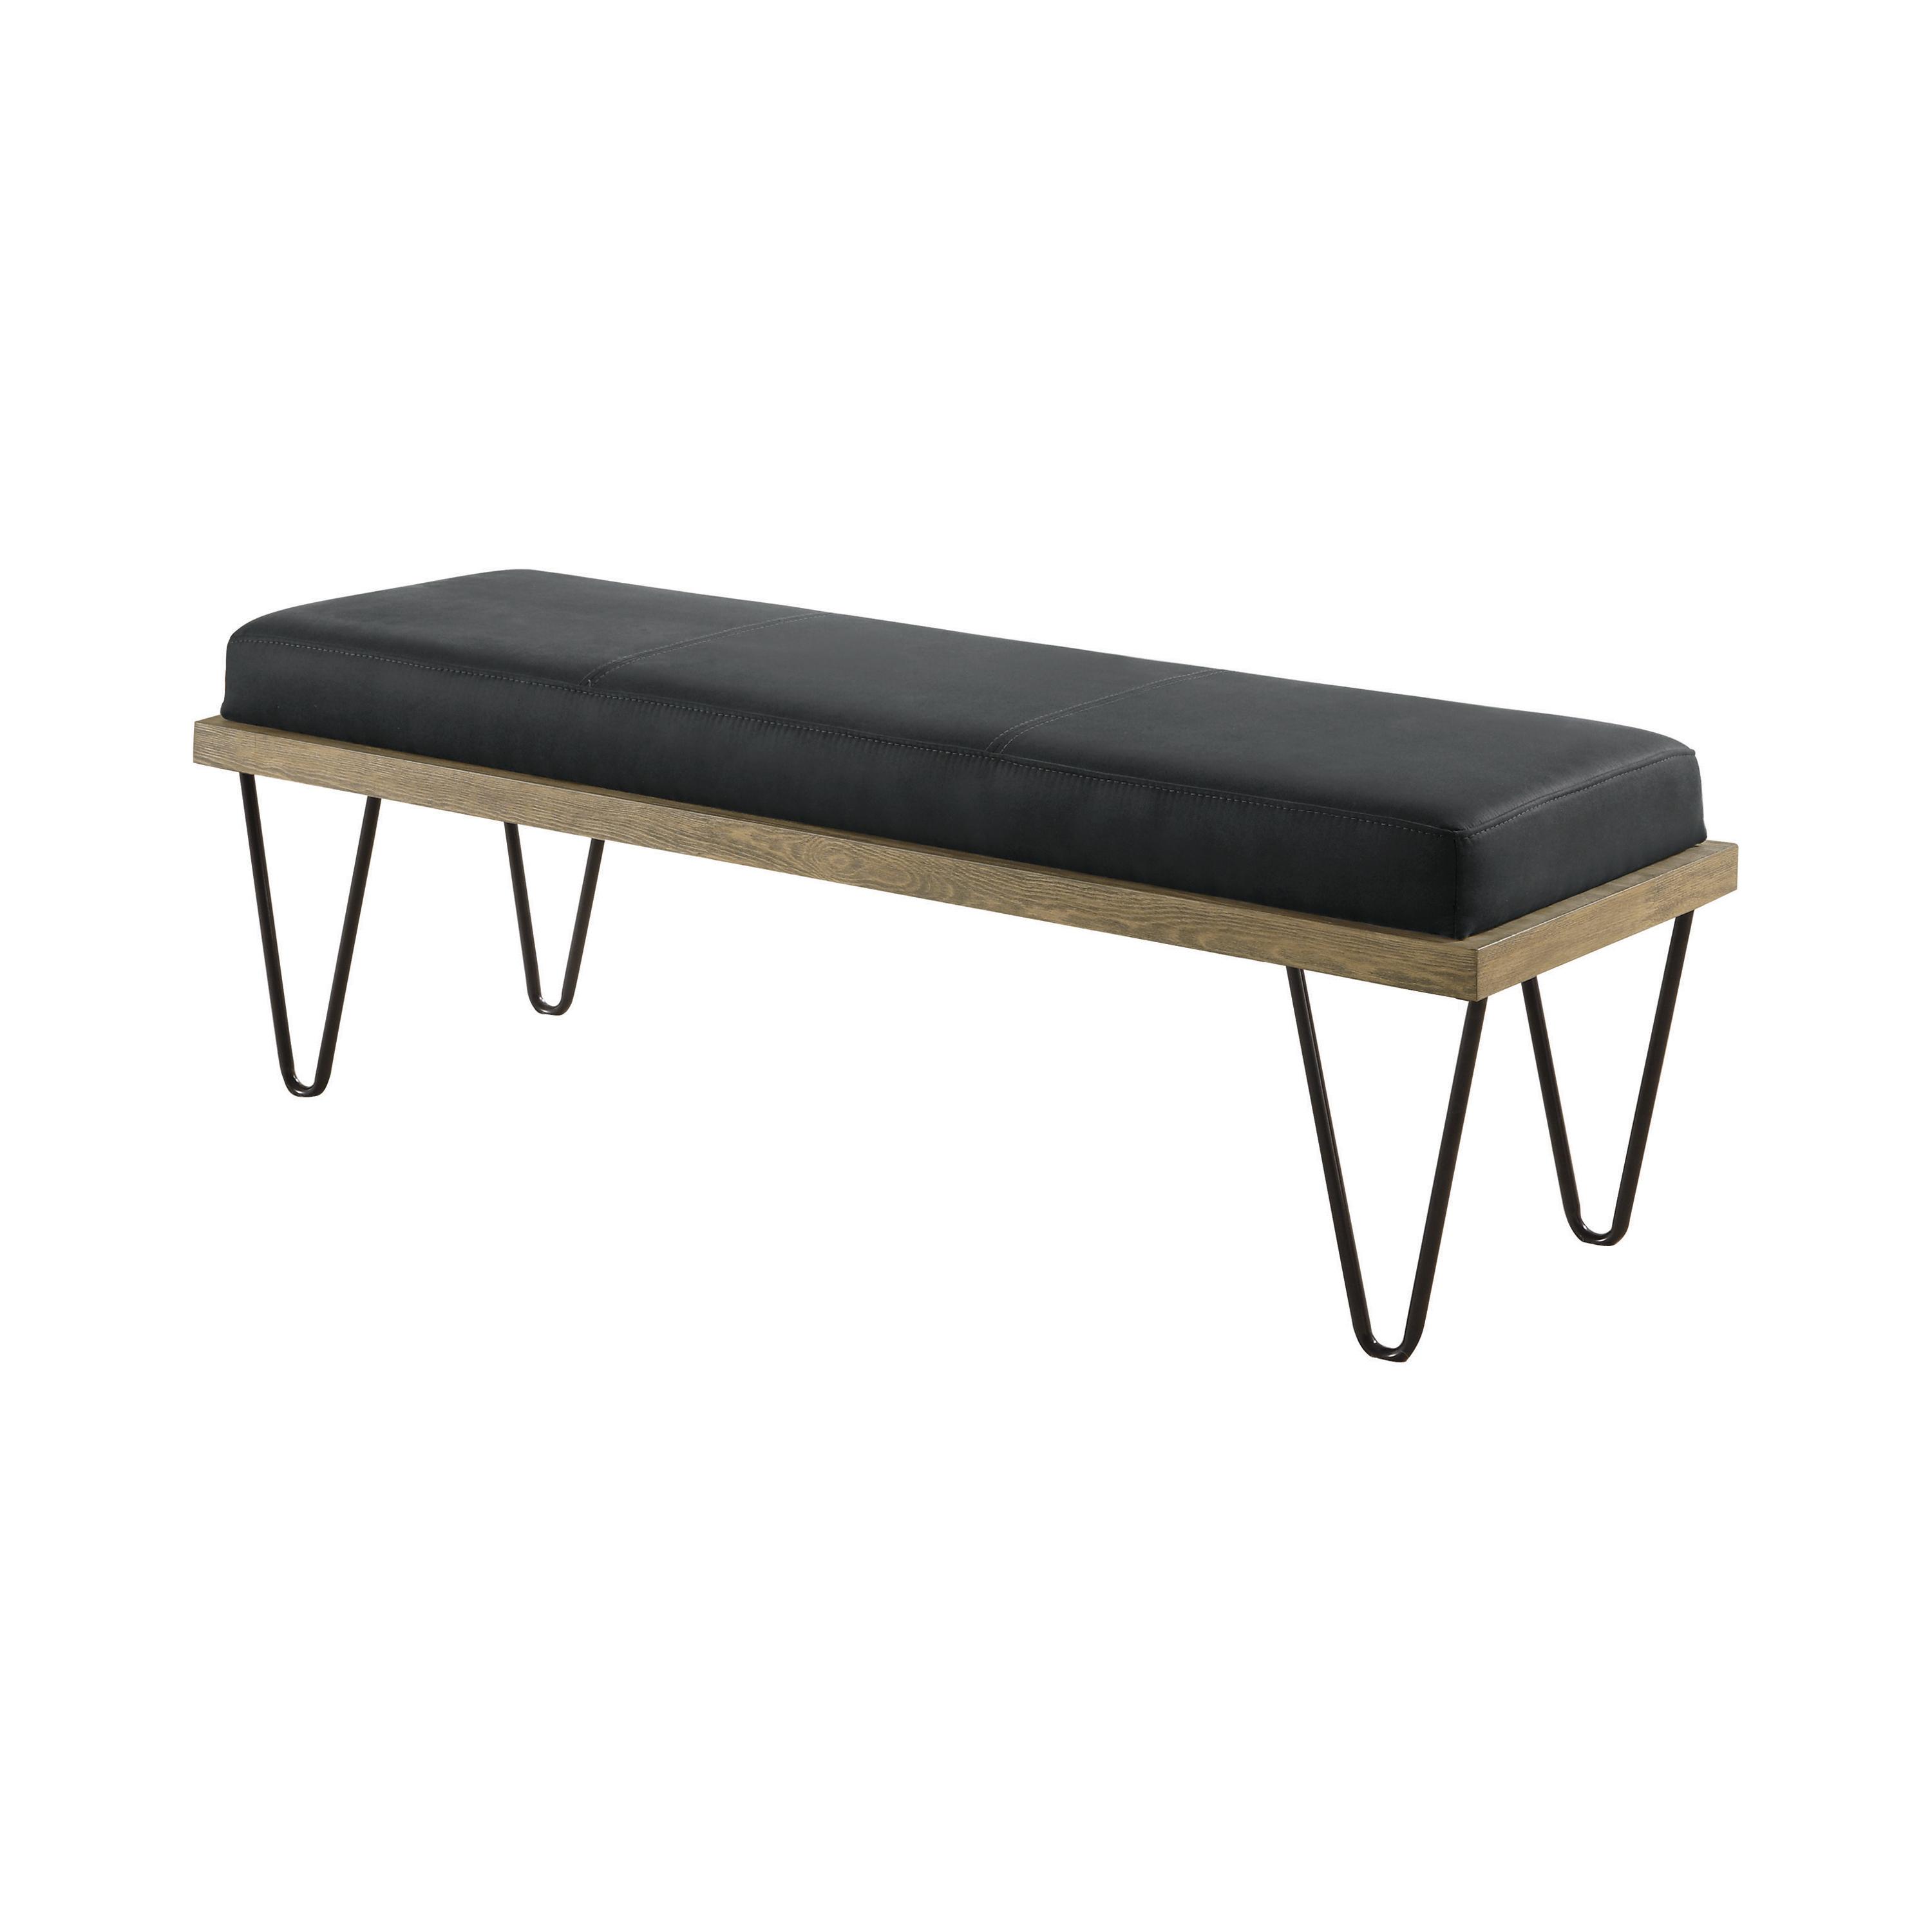 Transitional Bench 501837 501837 in Black Leatherette